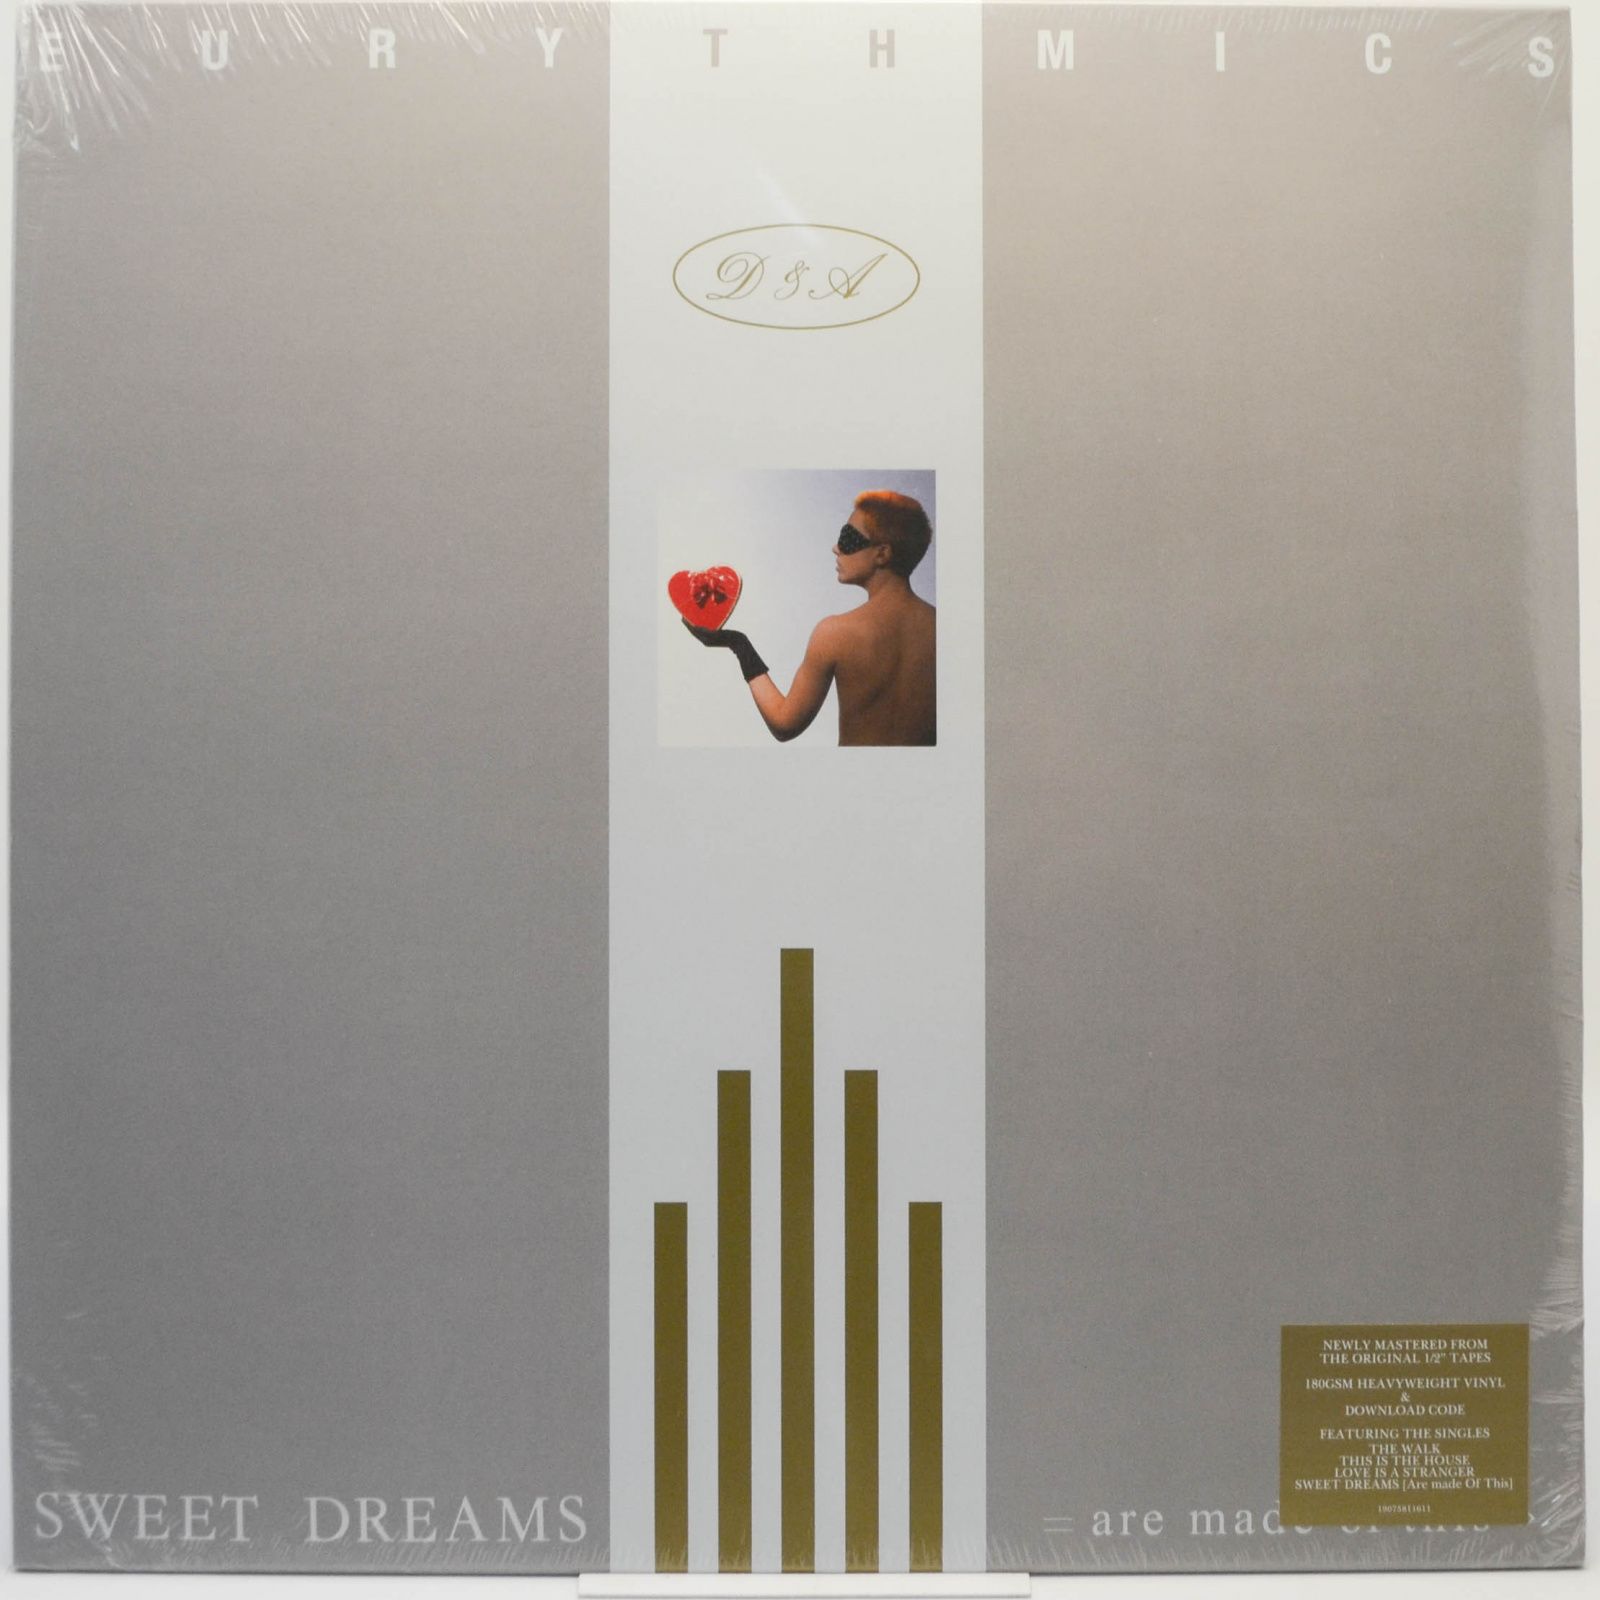 Sweet Dreams (Are Made Of This), 1983